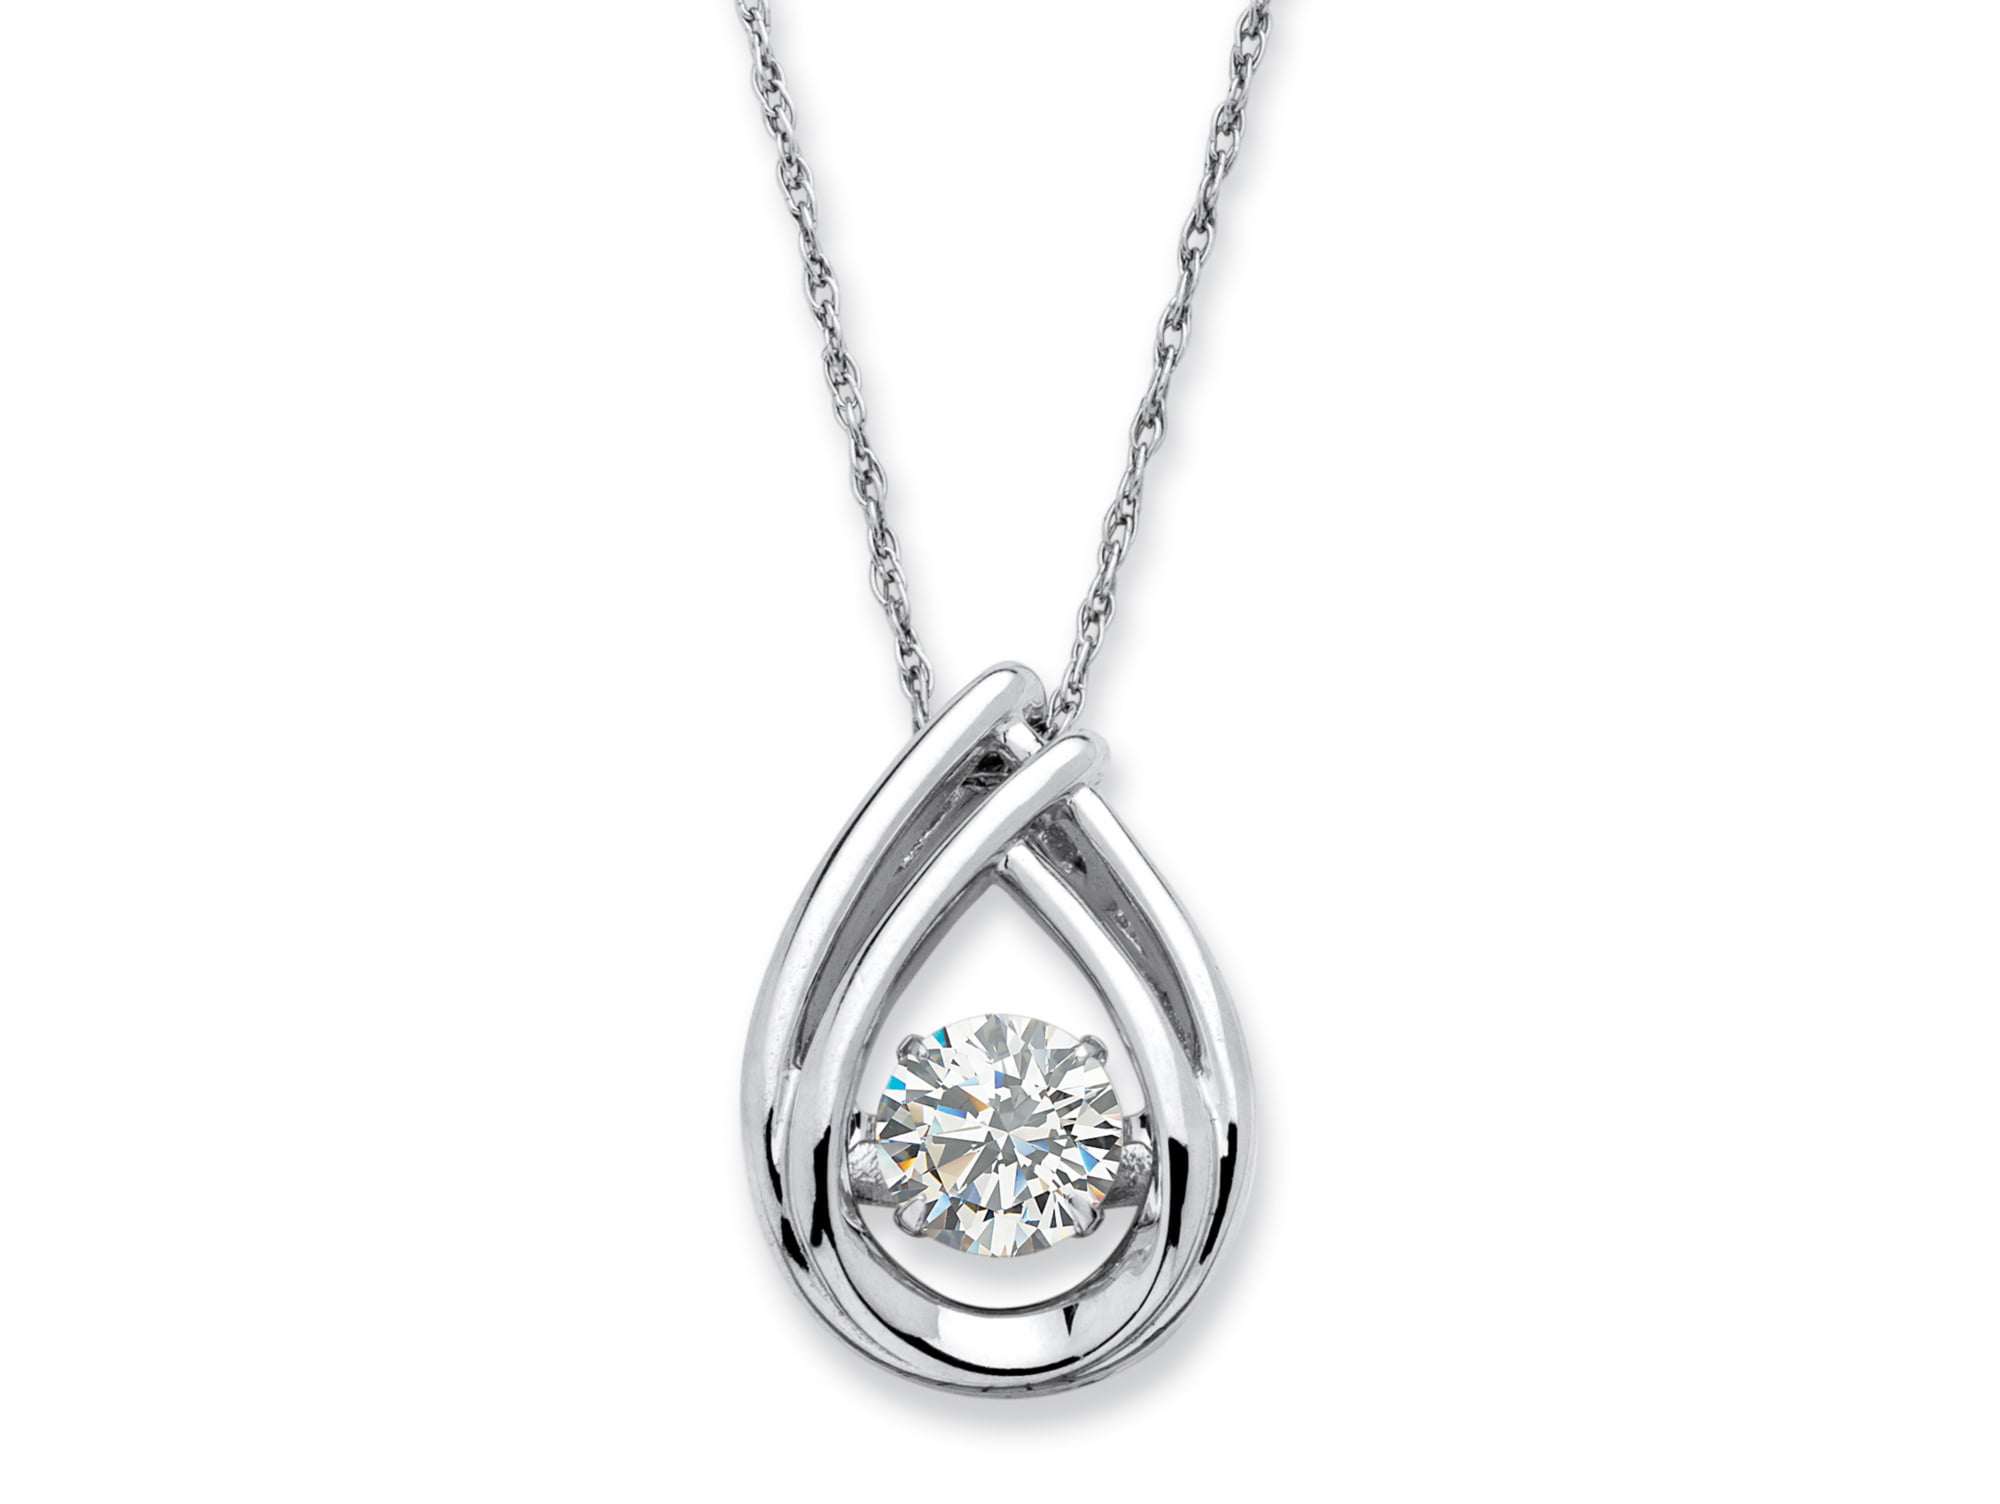 ZENI Women 925 Sterling Silver Pendant Necklace 18 Shiny Water Droplets with 3A Cubic Zirconia